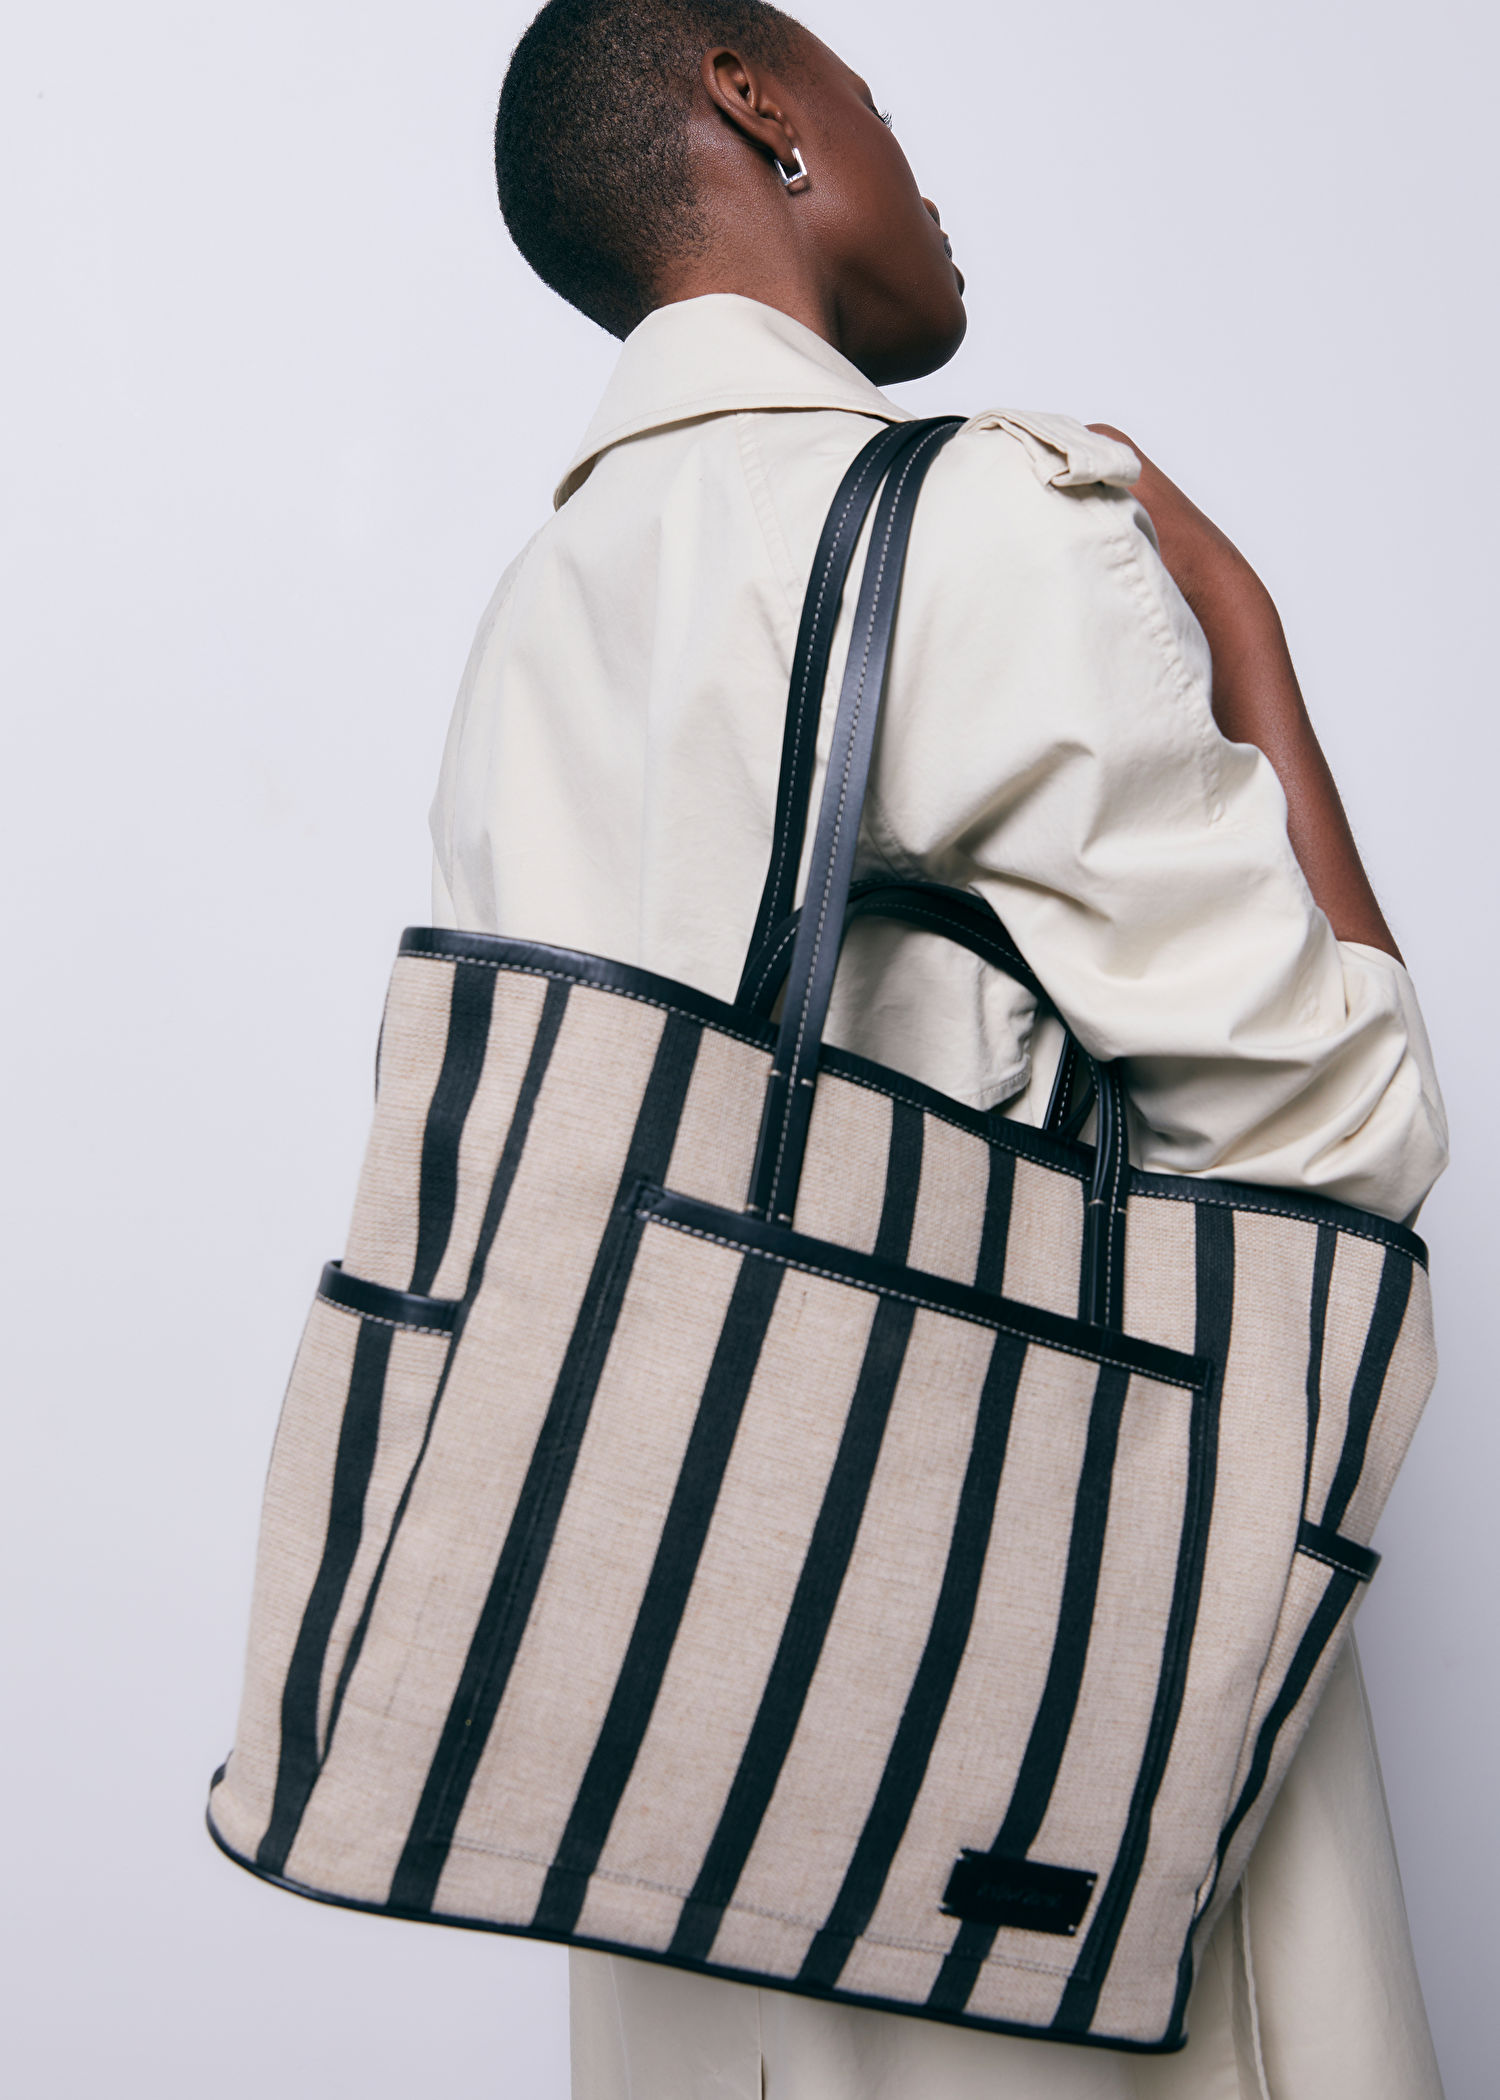 Summer 2022 Bag Trends to Expect This Season